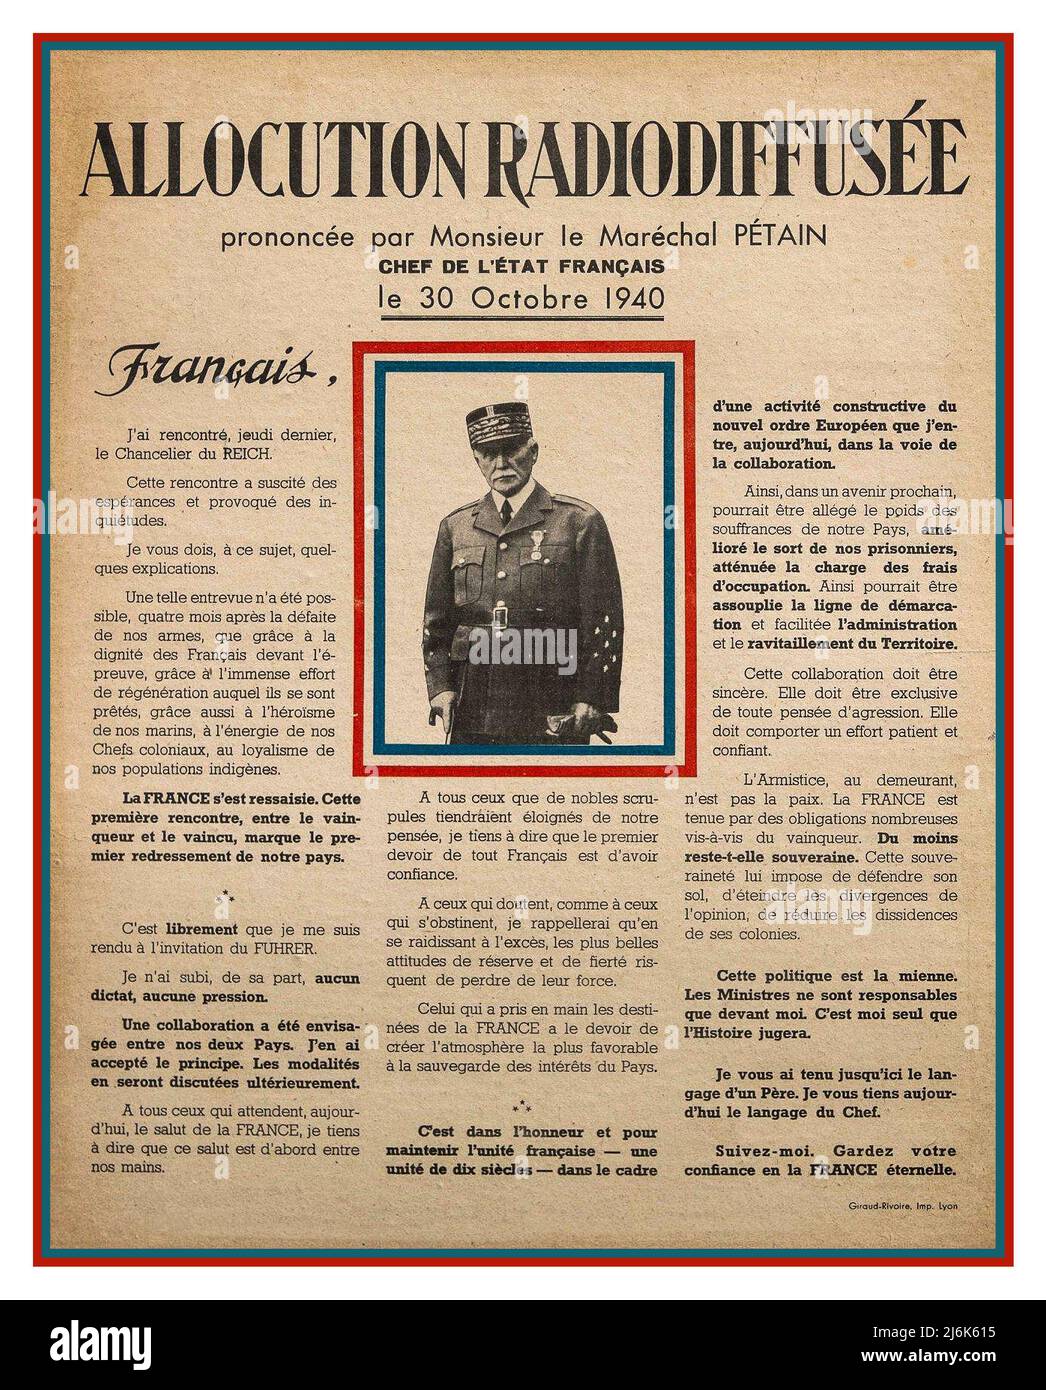 ALLOCUTION RADIODIFFUSEE WW2 France Marshall Petain Radio Broadcast to France 'affiche allocution radiodiffusee' Poster Propaganda broadcast subsequent printed transcript of speech 30 th October 1940 Stock Photo